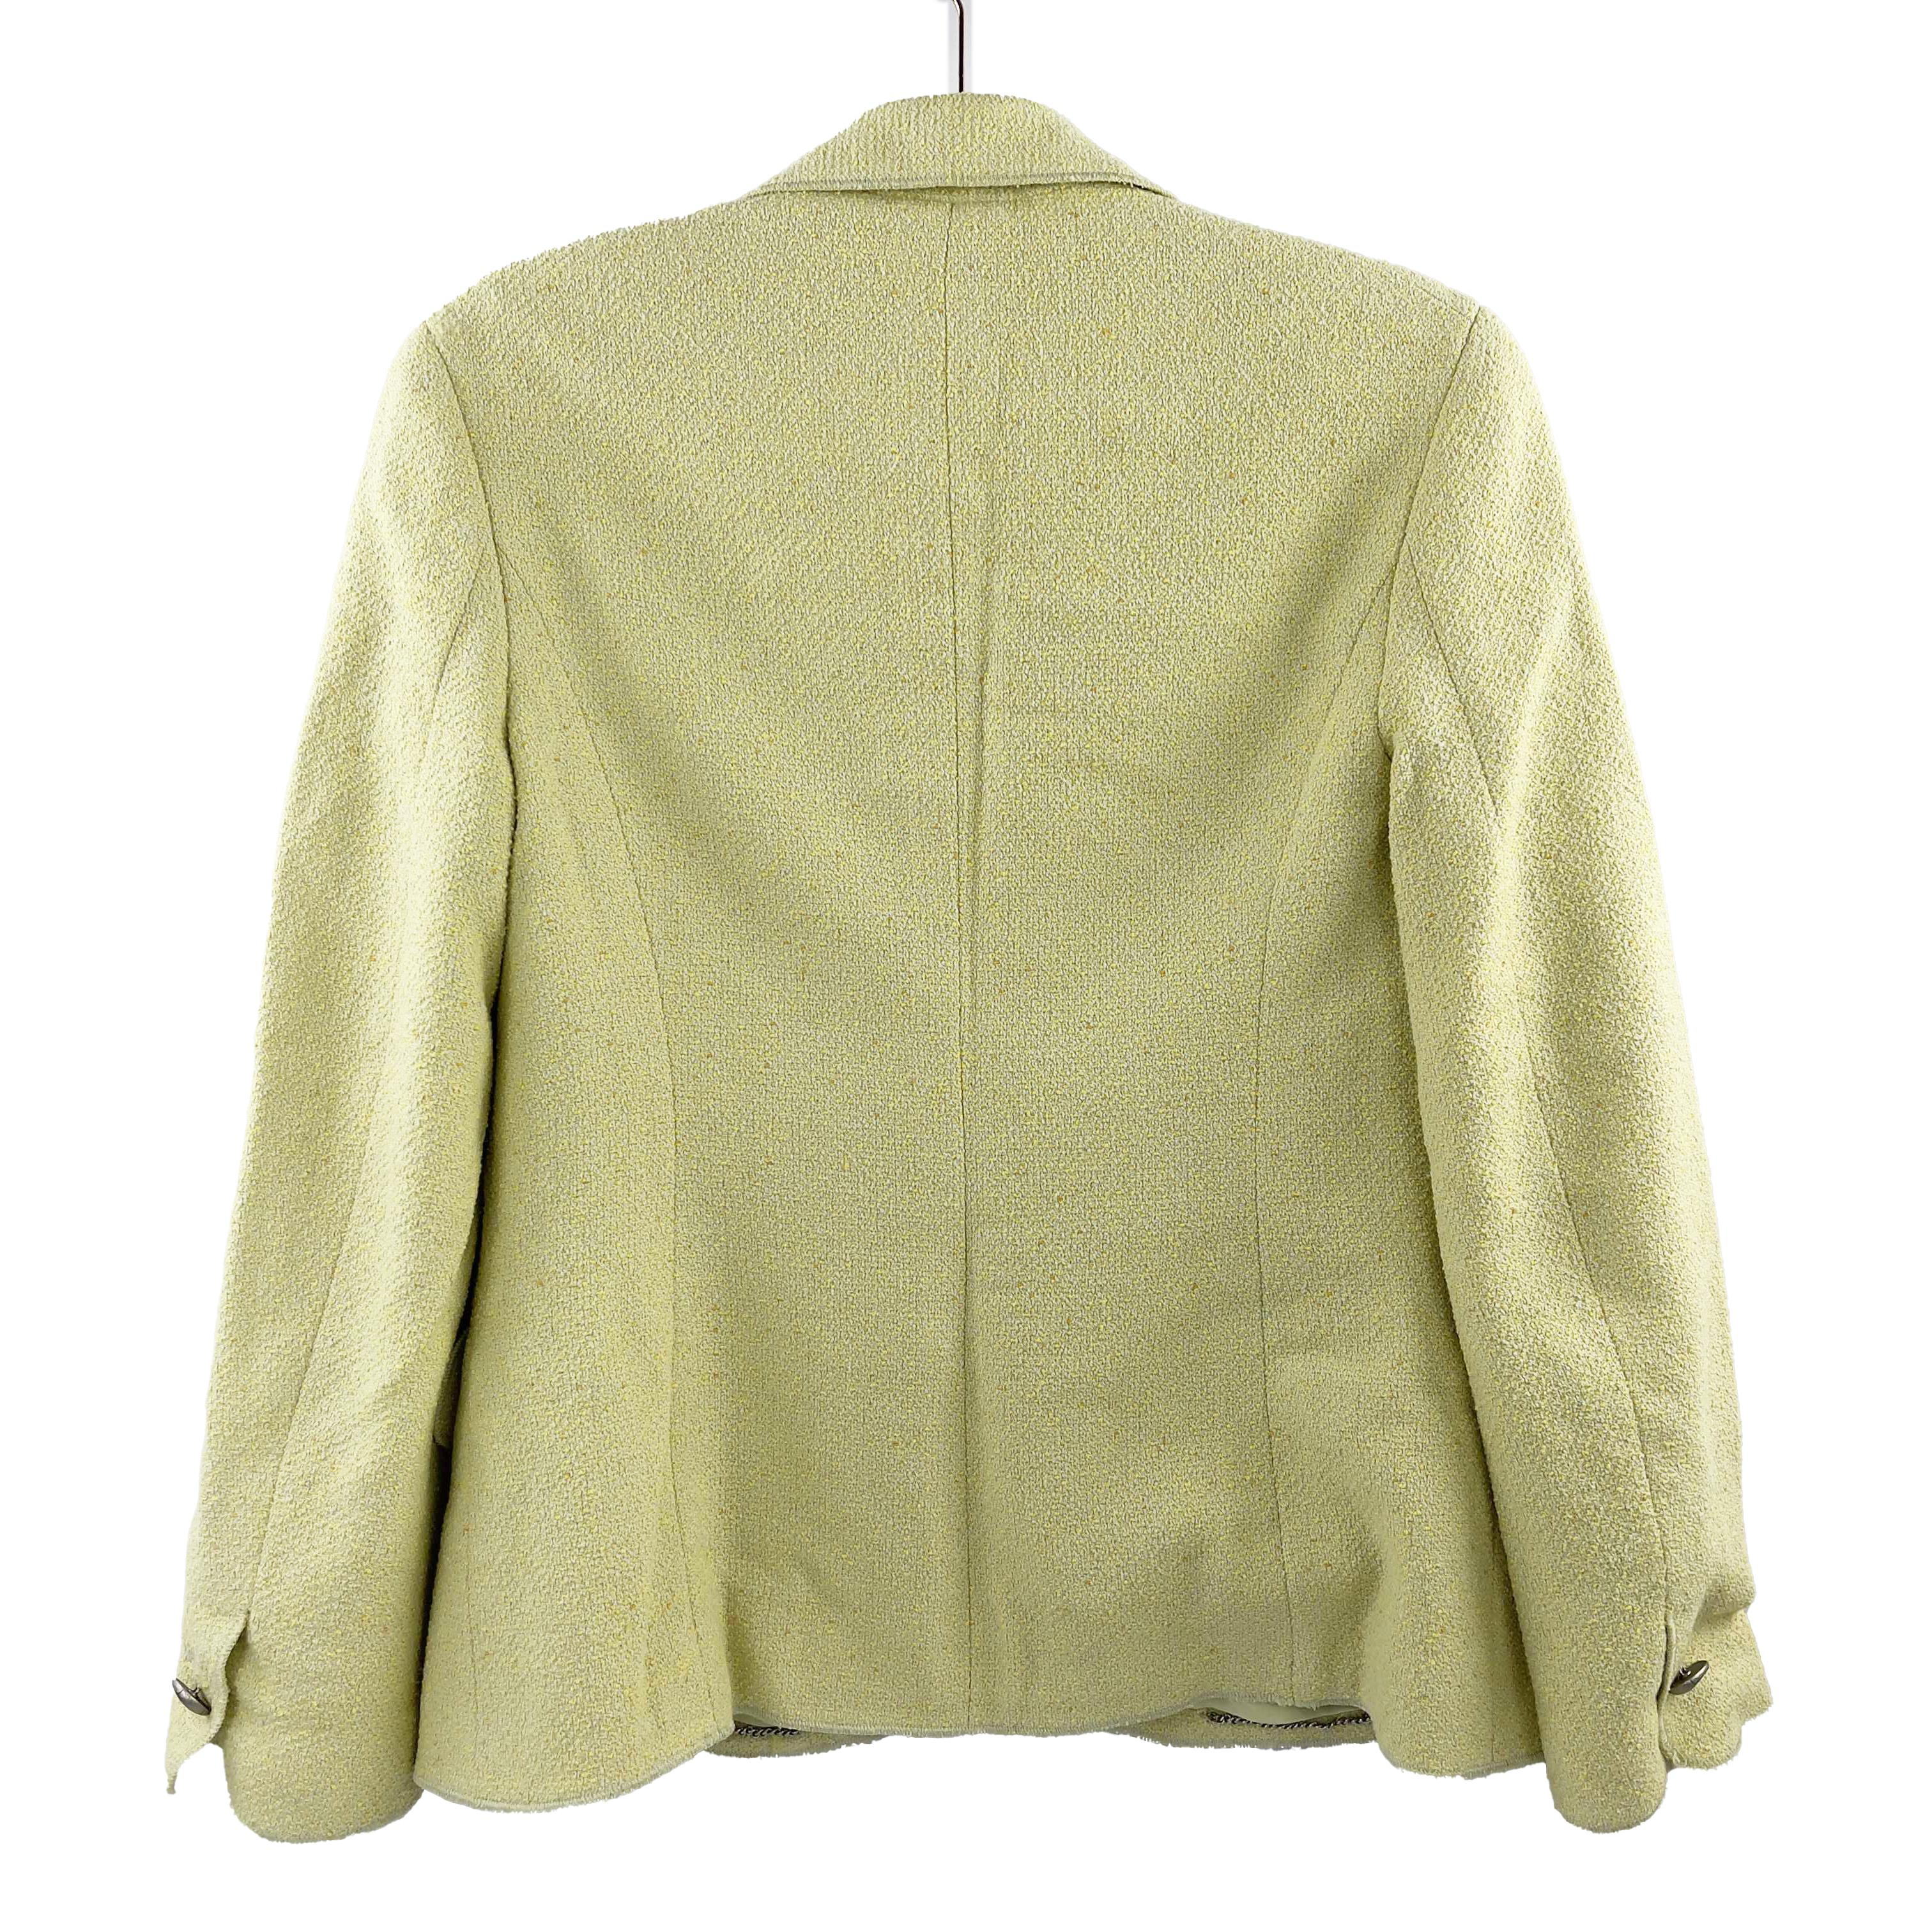 CHANEL - Vintage 98P 1998 Blazer Jacket & Skirt Set Pastel Chartreuse - US 4

Description

1998 Spring collection
Single breasted jacket & skirt in pale yellow-green  with  CC logo silk lining.
Jacket has a matte silver tone button closure, inner